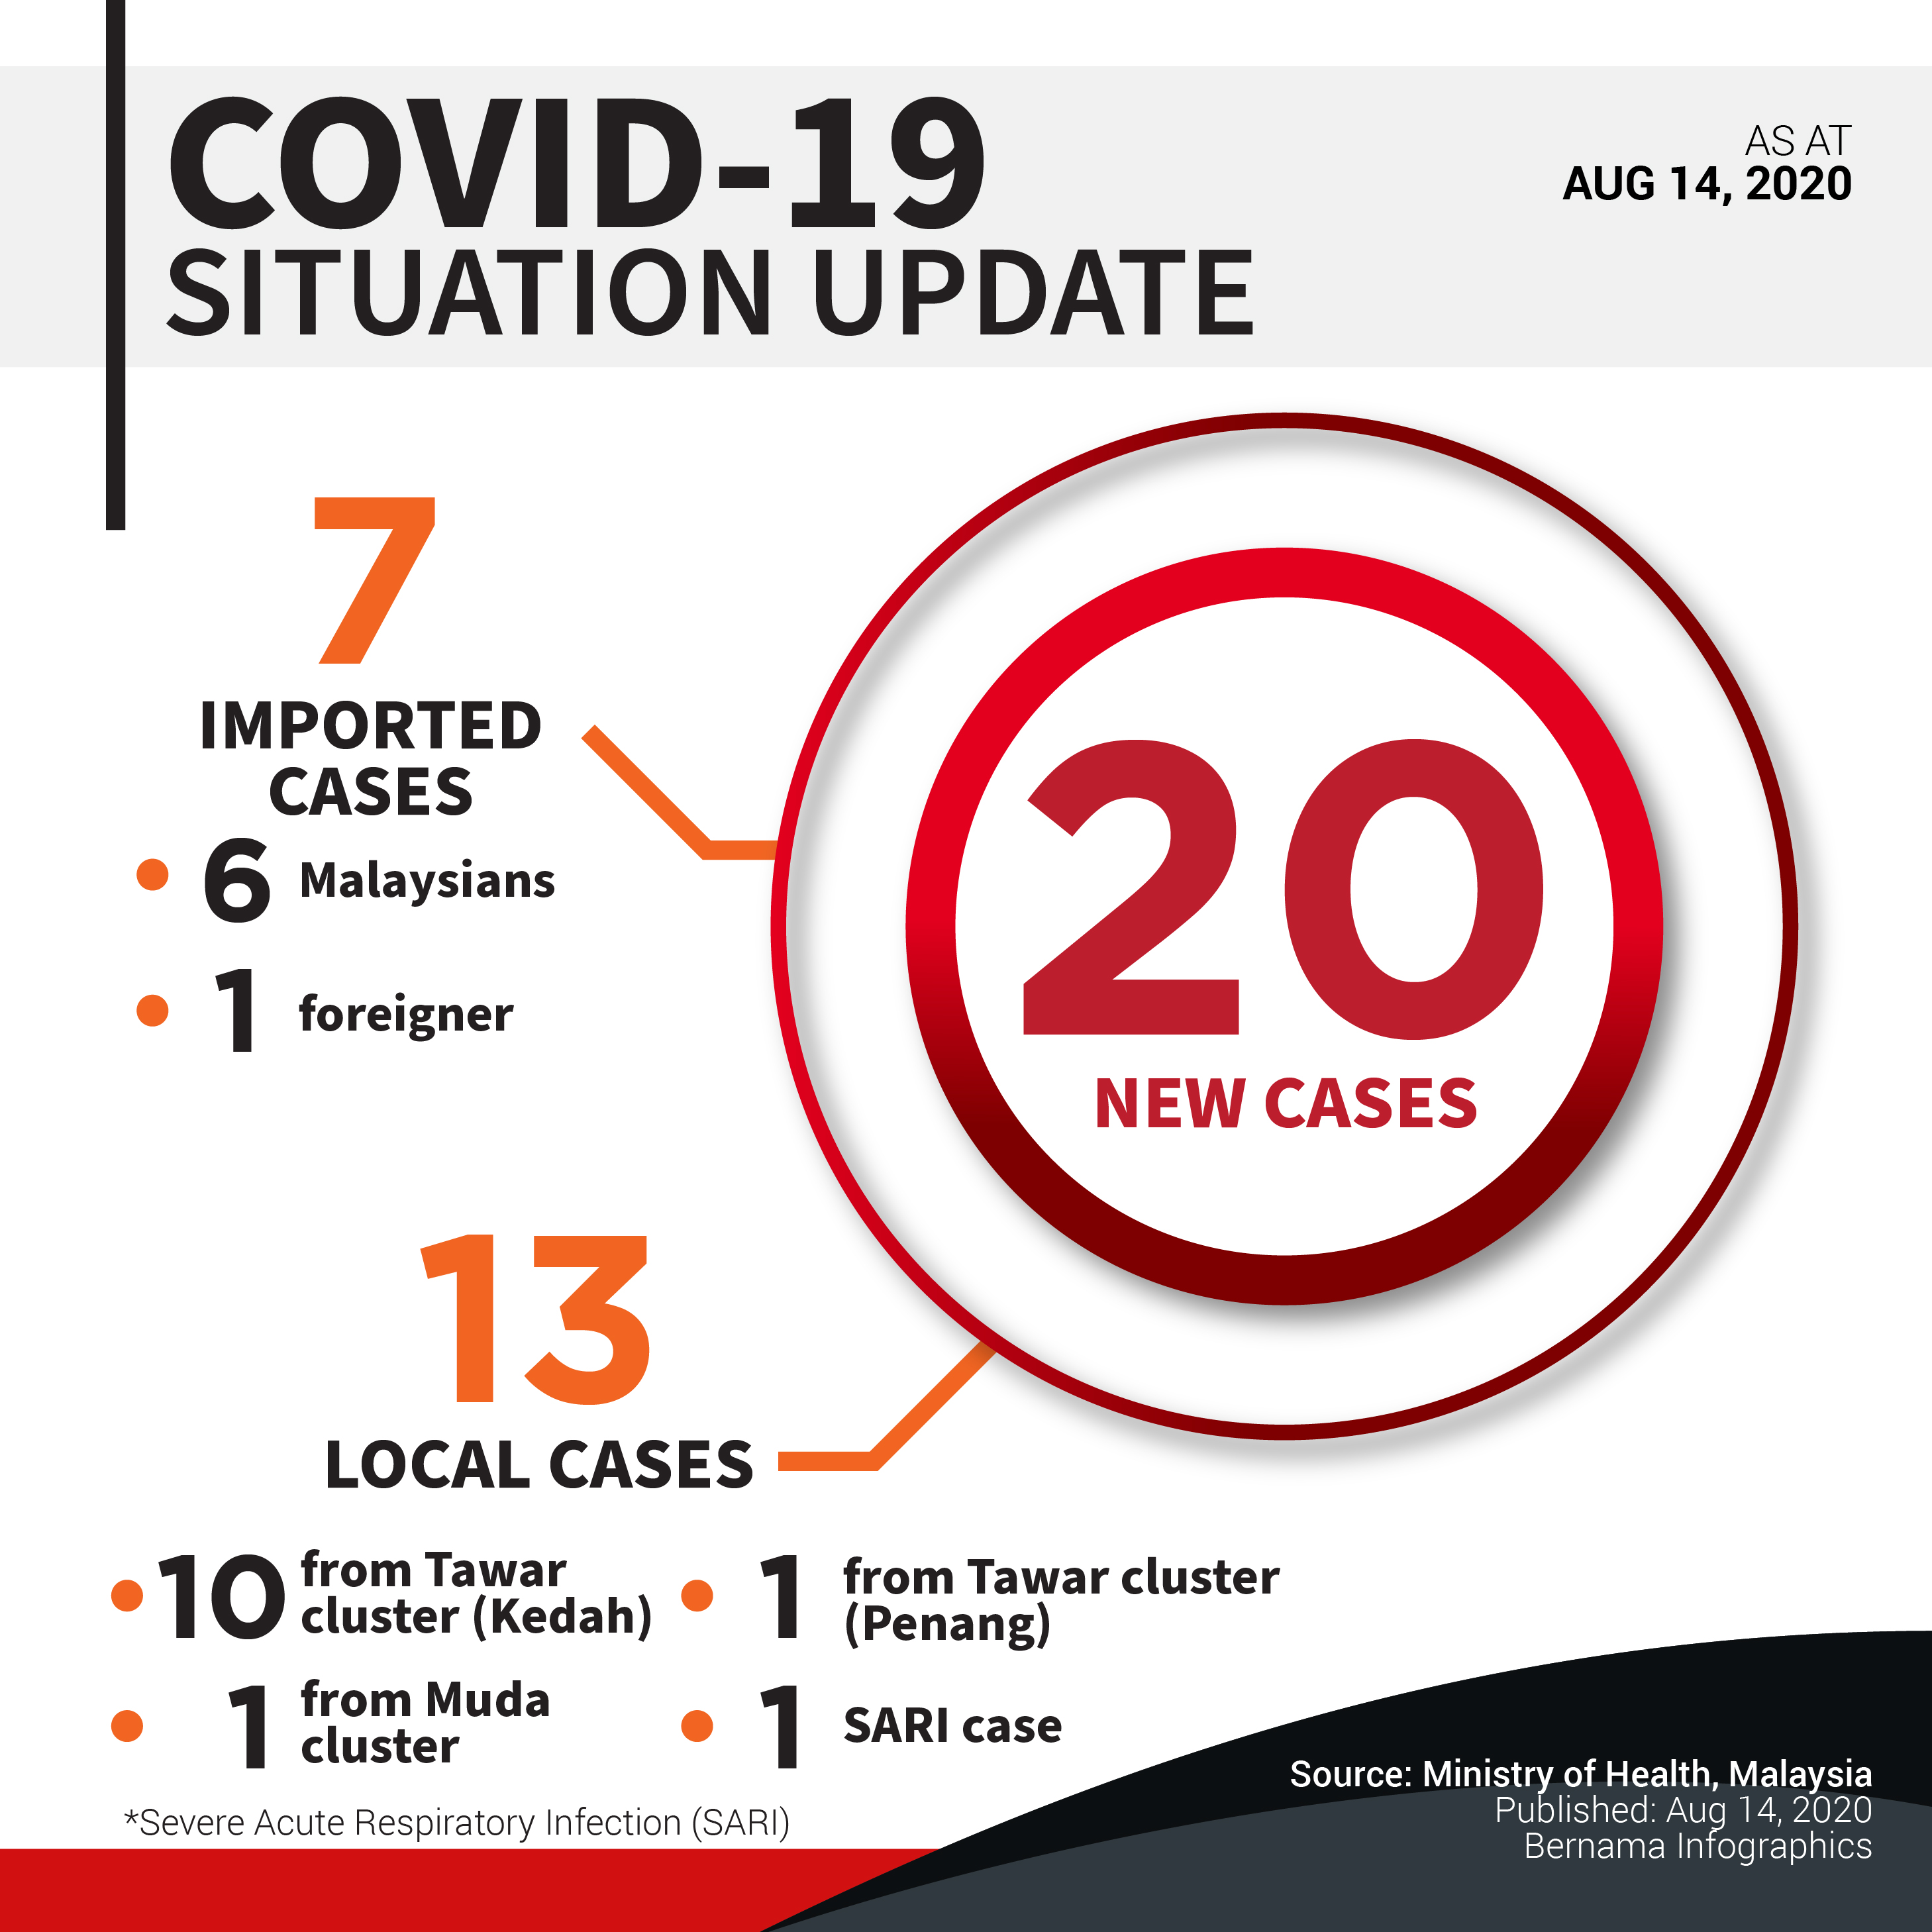 Malaysia sees 20 new COVID-19 cases